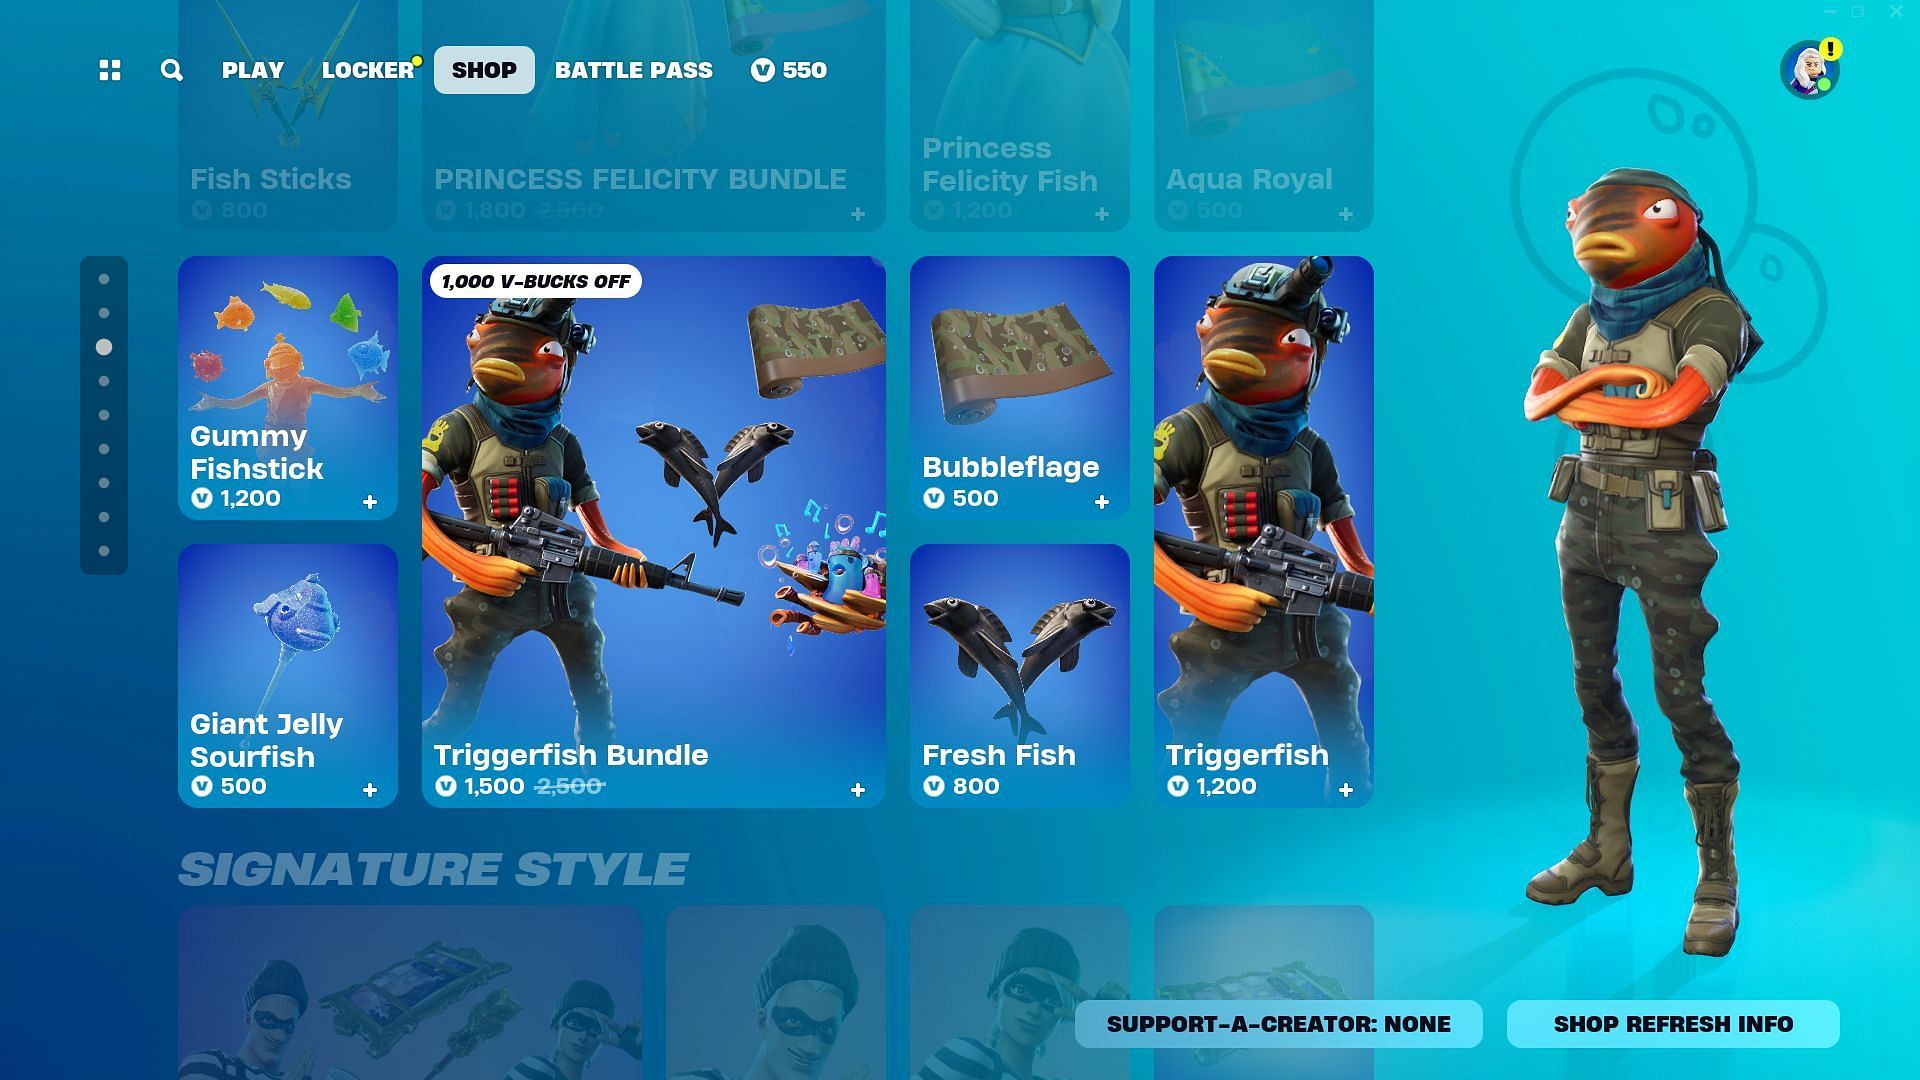 You can now purchase the Triggerfish skin in Fortnite (Image via Epic Games)